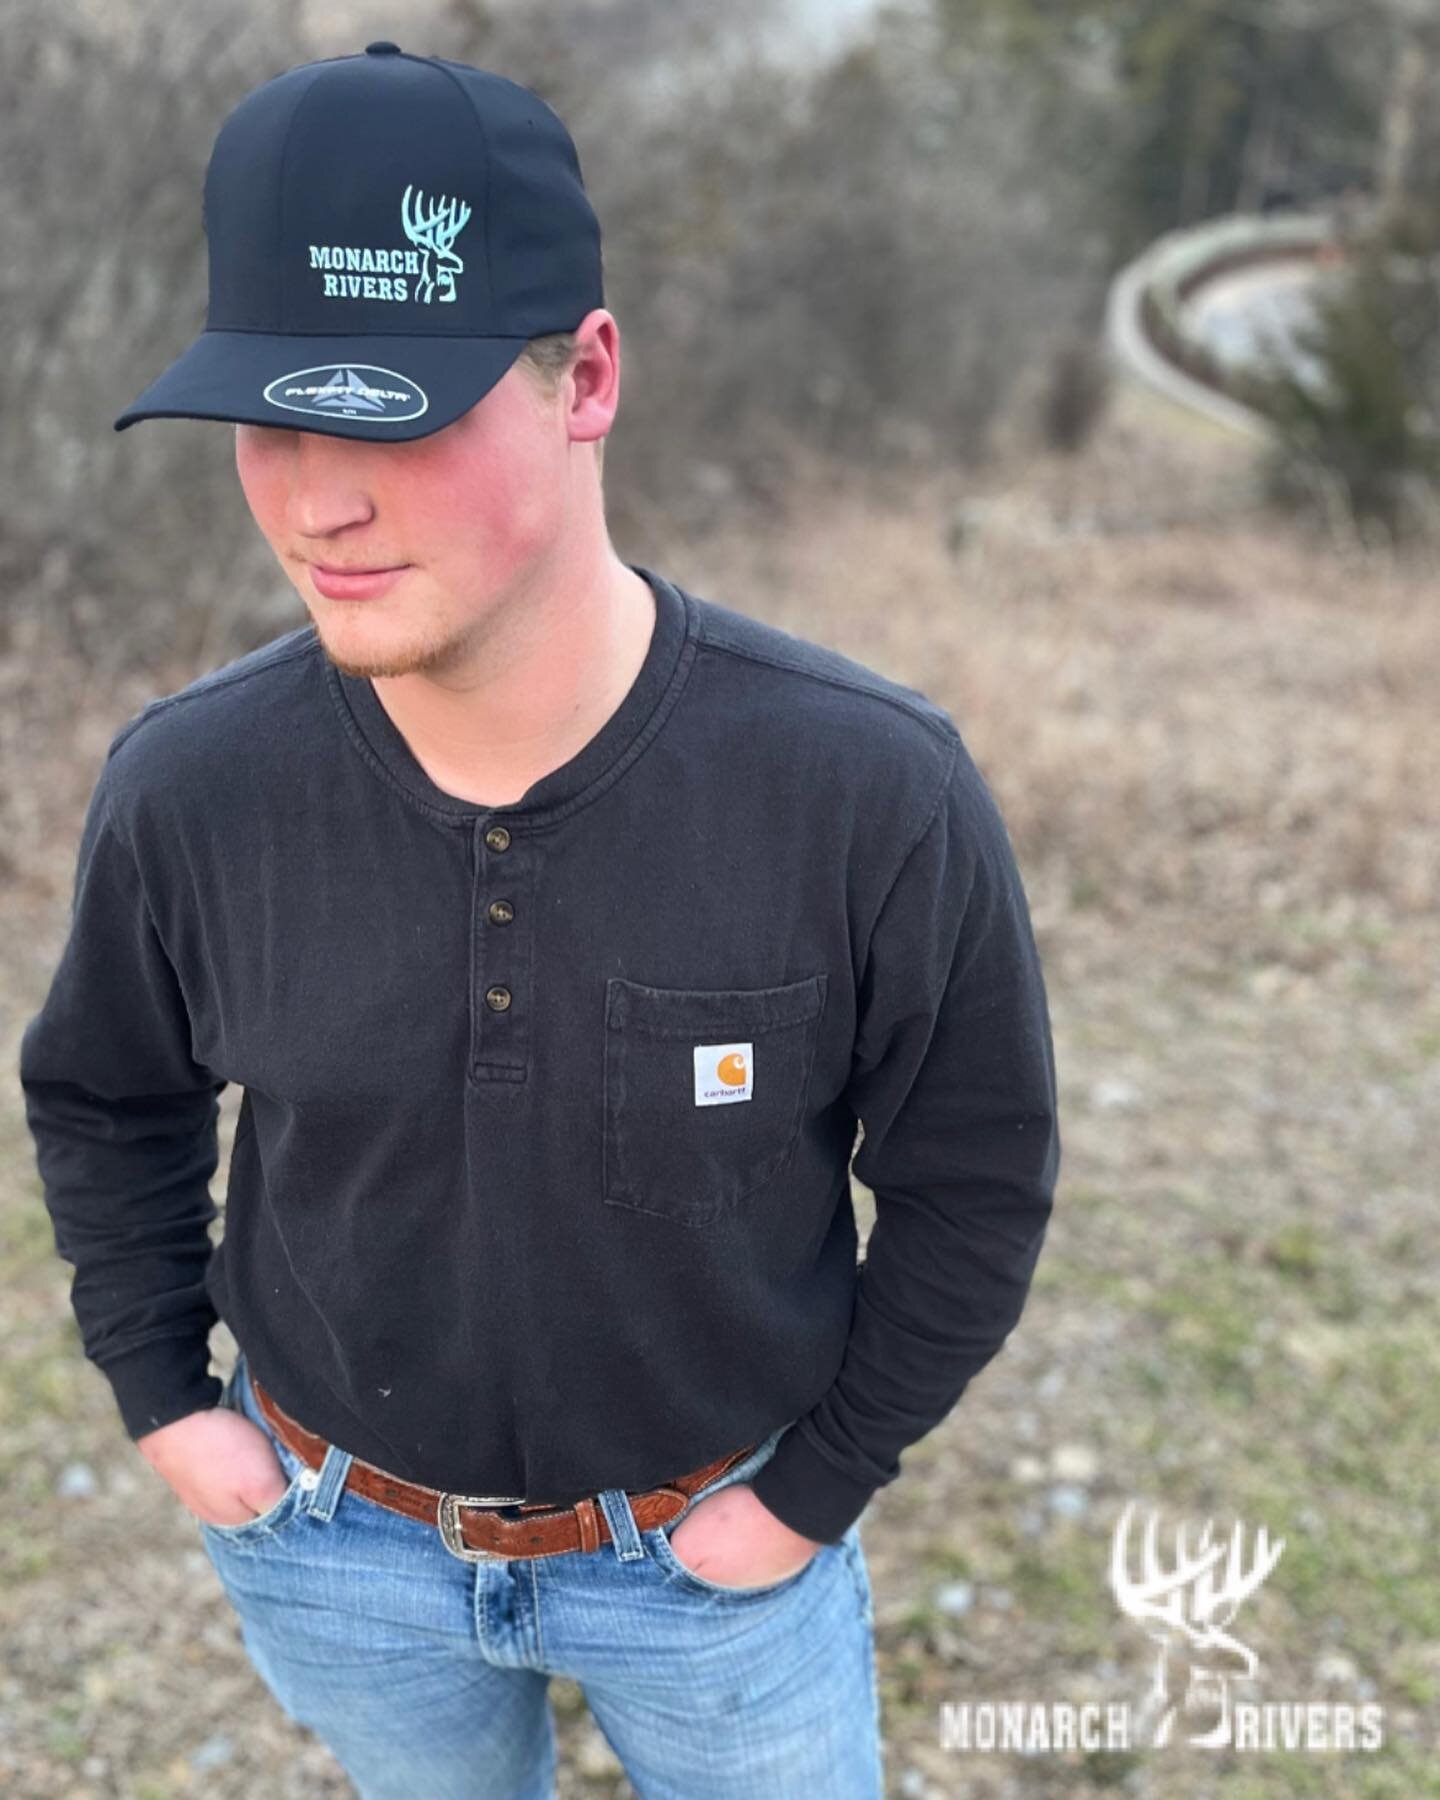 ⚡️MONARCH RIVERS GIVEAWAY⚡️ 

Can we talk merch real quick? Let us know in the comments what kind of Monarch Rivers merchandise you&rsquo;d like to see next (hats, tees, sweatshirts, tumblers, etc.), or tag a buddy that needs more MR swag in their li